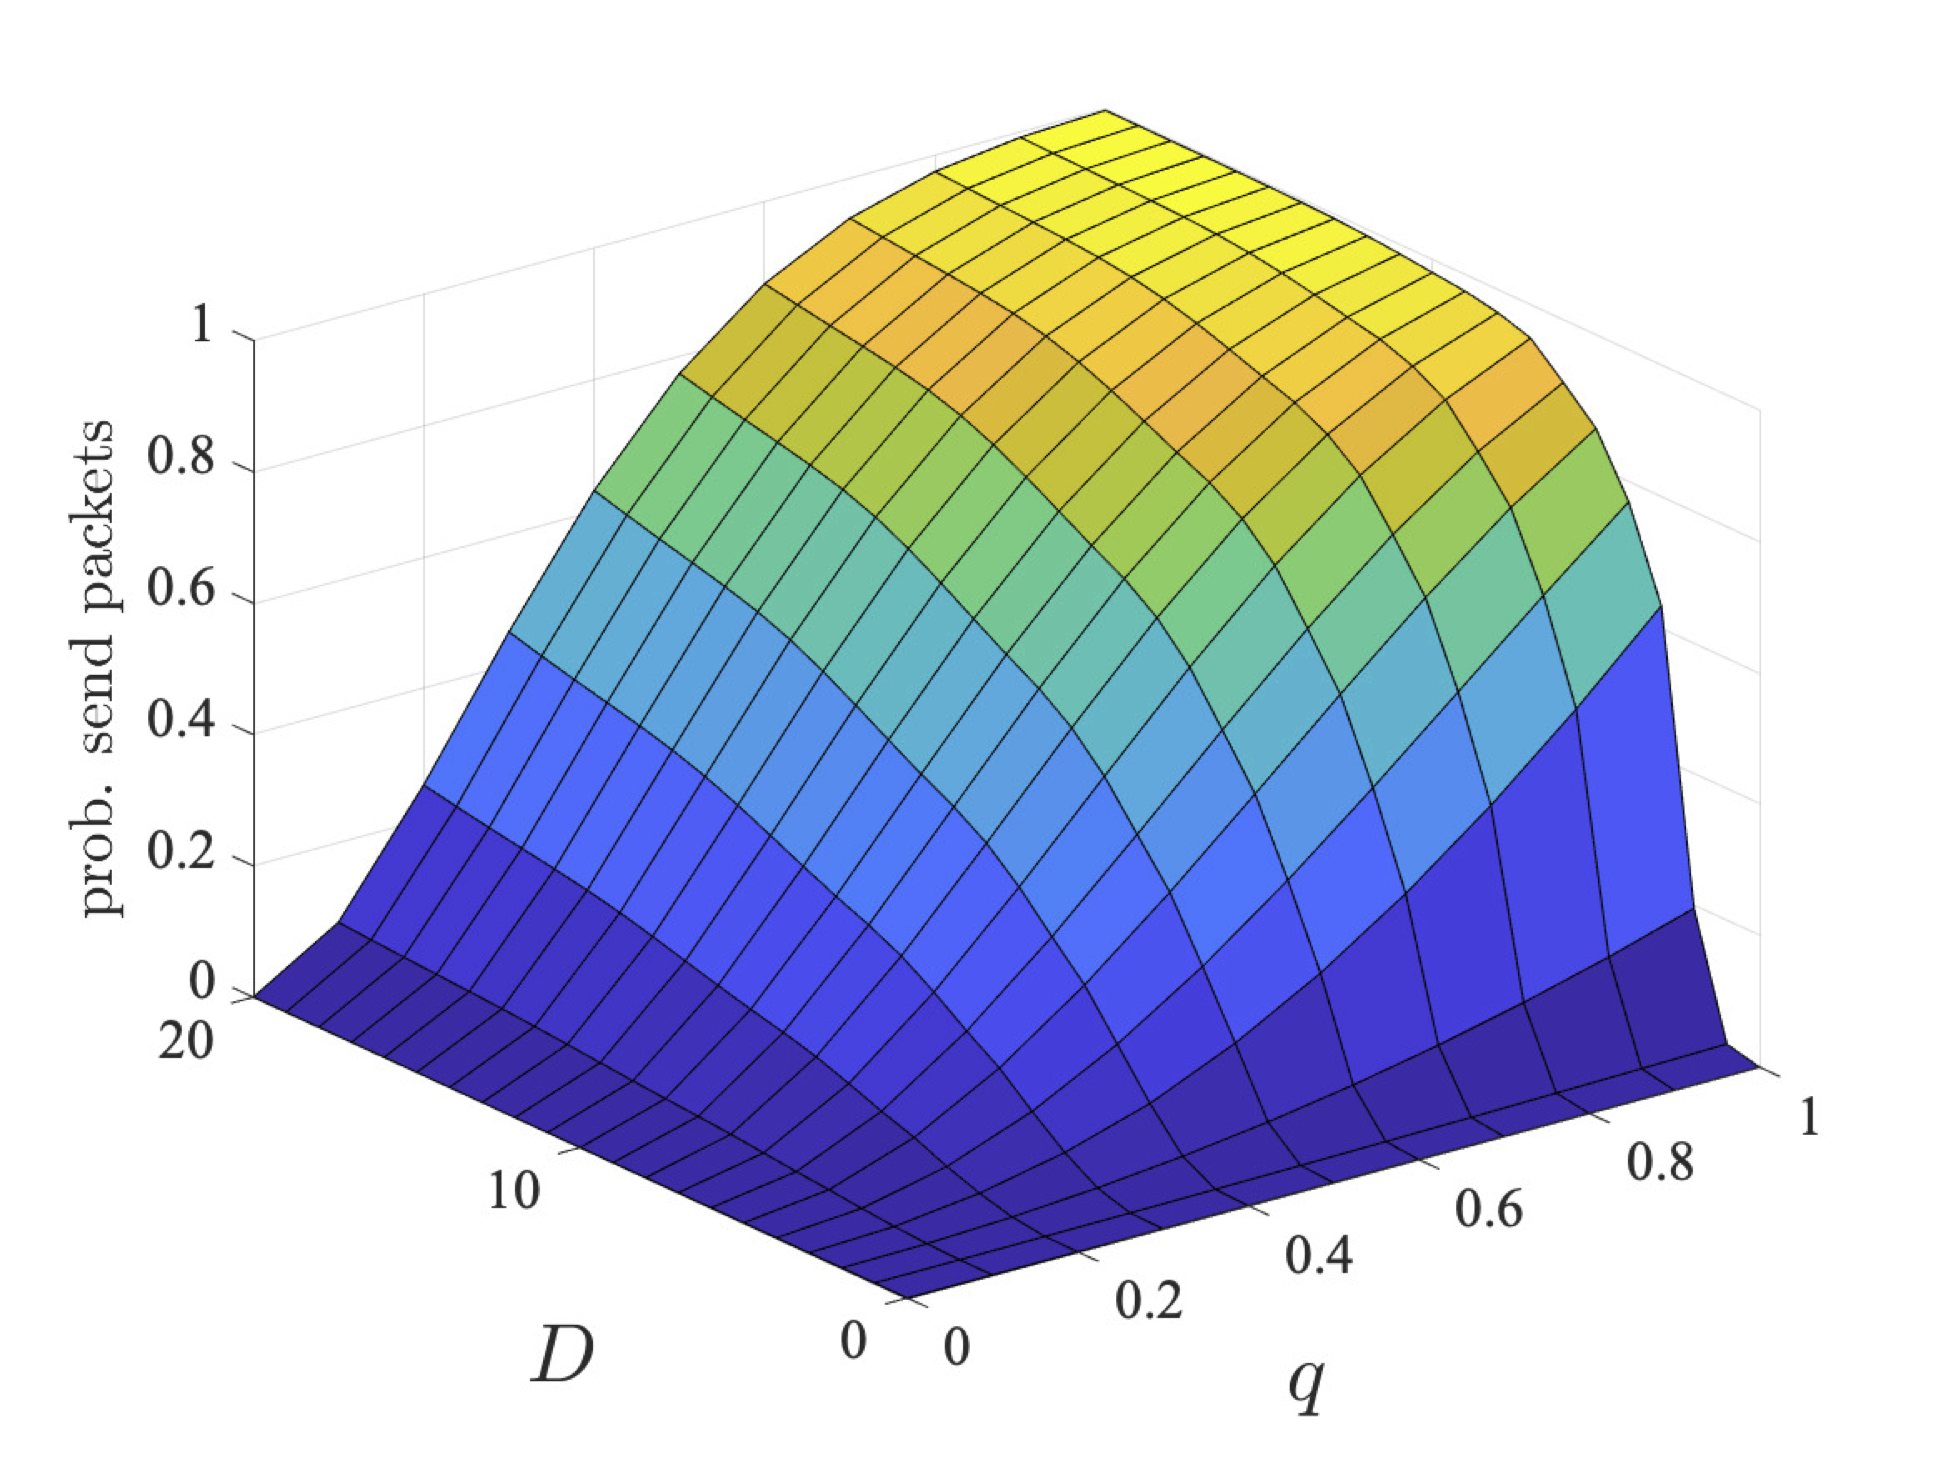 plot: maximum probability users 2 and 3 can ensure they send their packets within a deadline (bcmax=4)